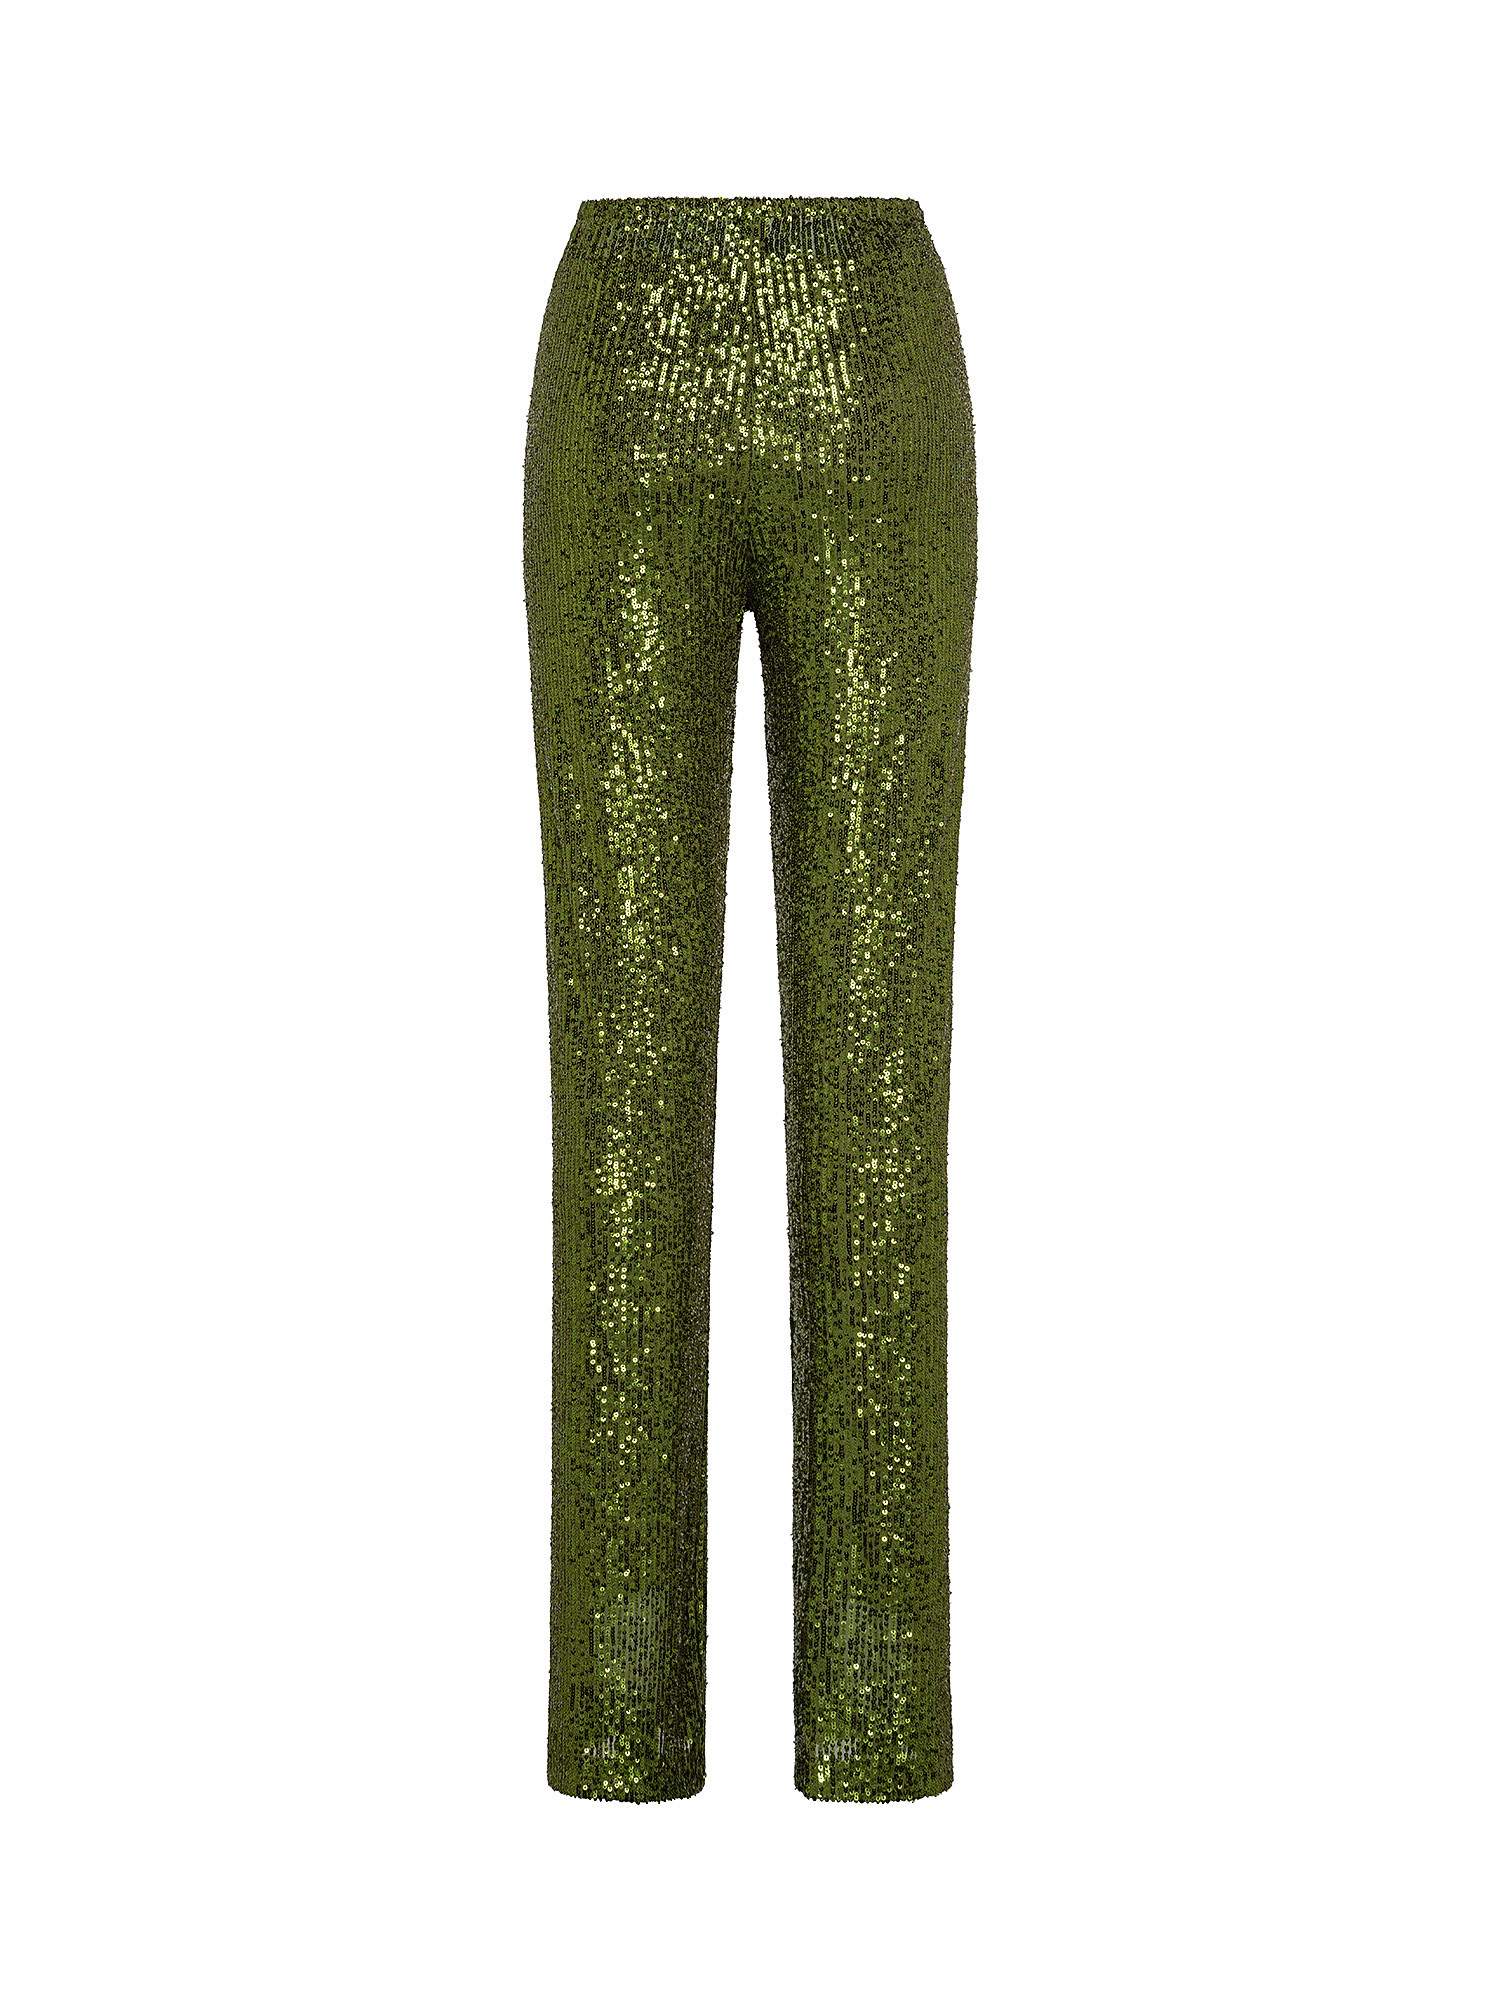 Trousers with sequins, Green, large image number 1